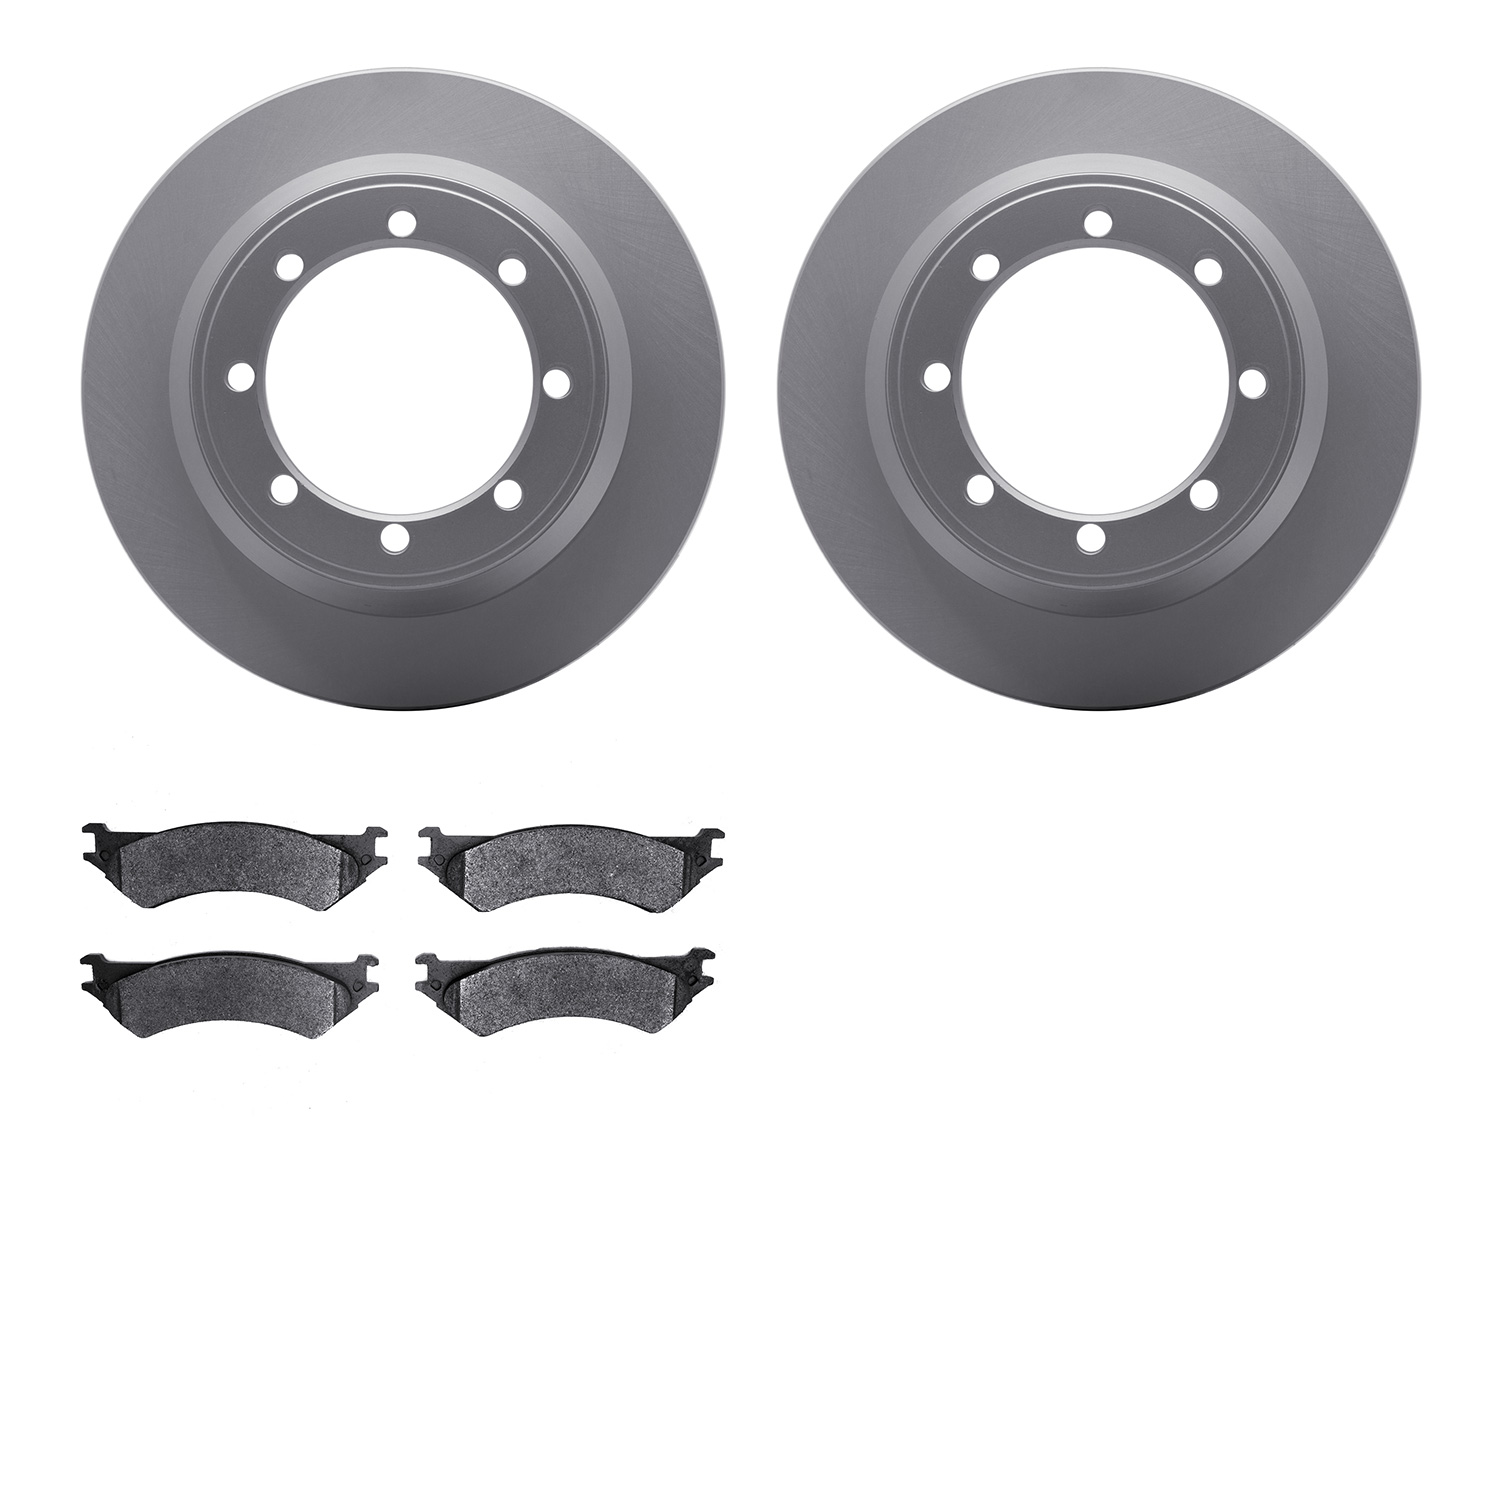 4402-54030 Geospec Brake Rotors with Ultimate-Duty Brake Pads Kit, 1999-2007 Ford/Lincoln/Mercury/Mazda, Position: Rear